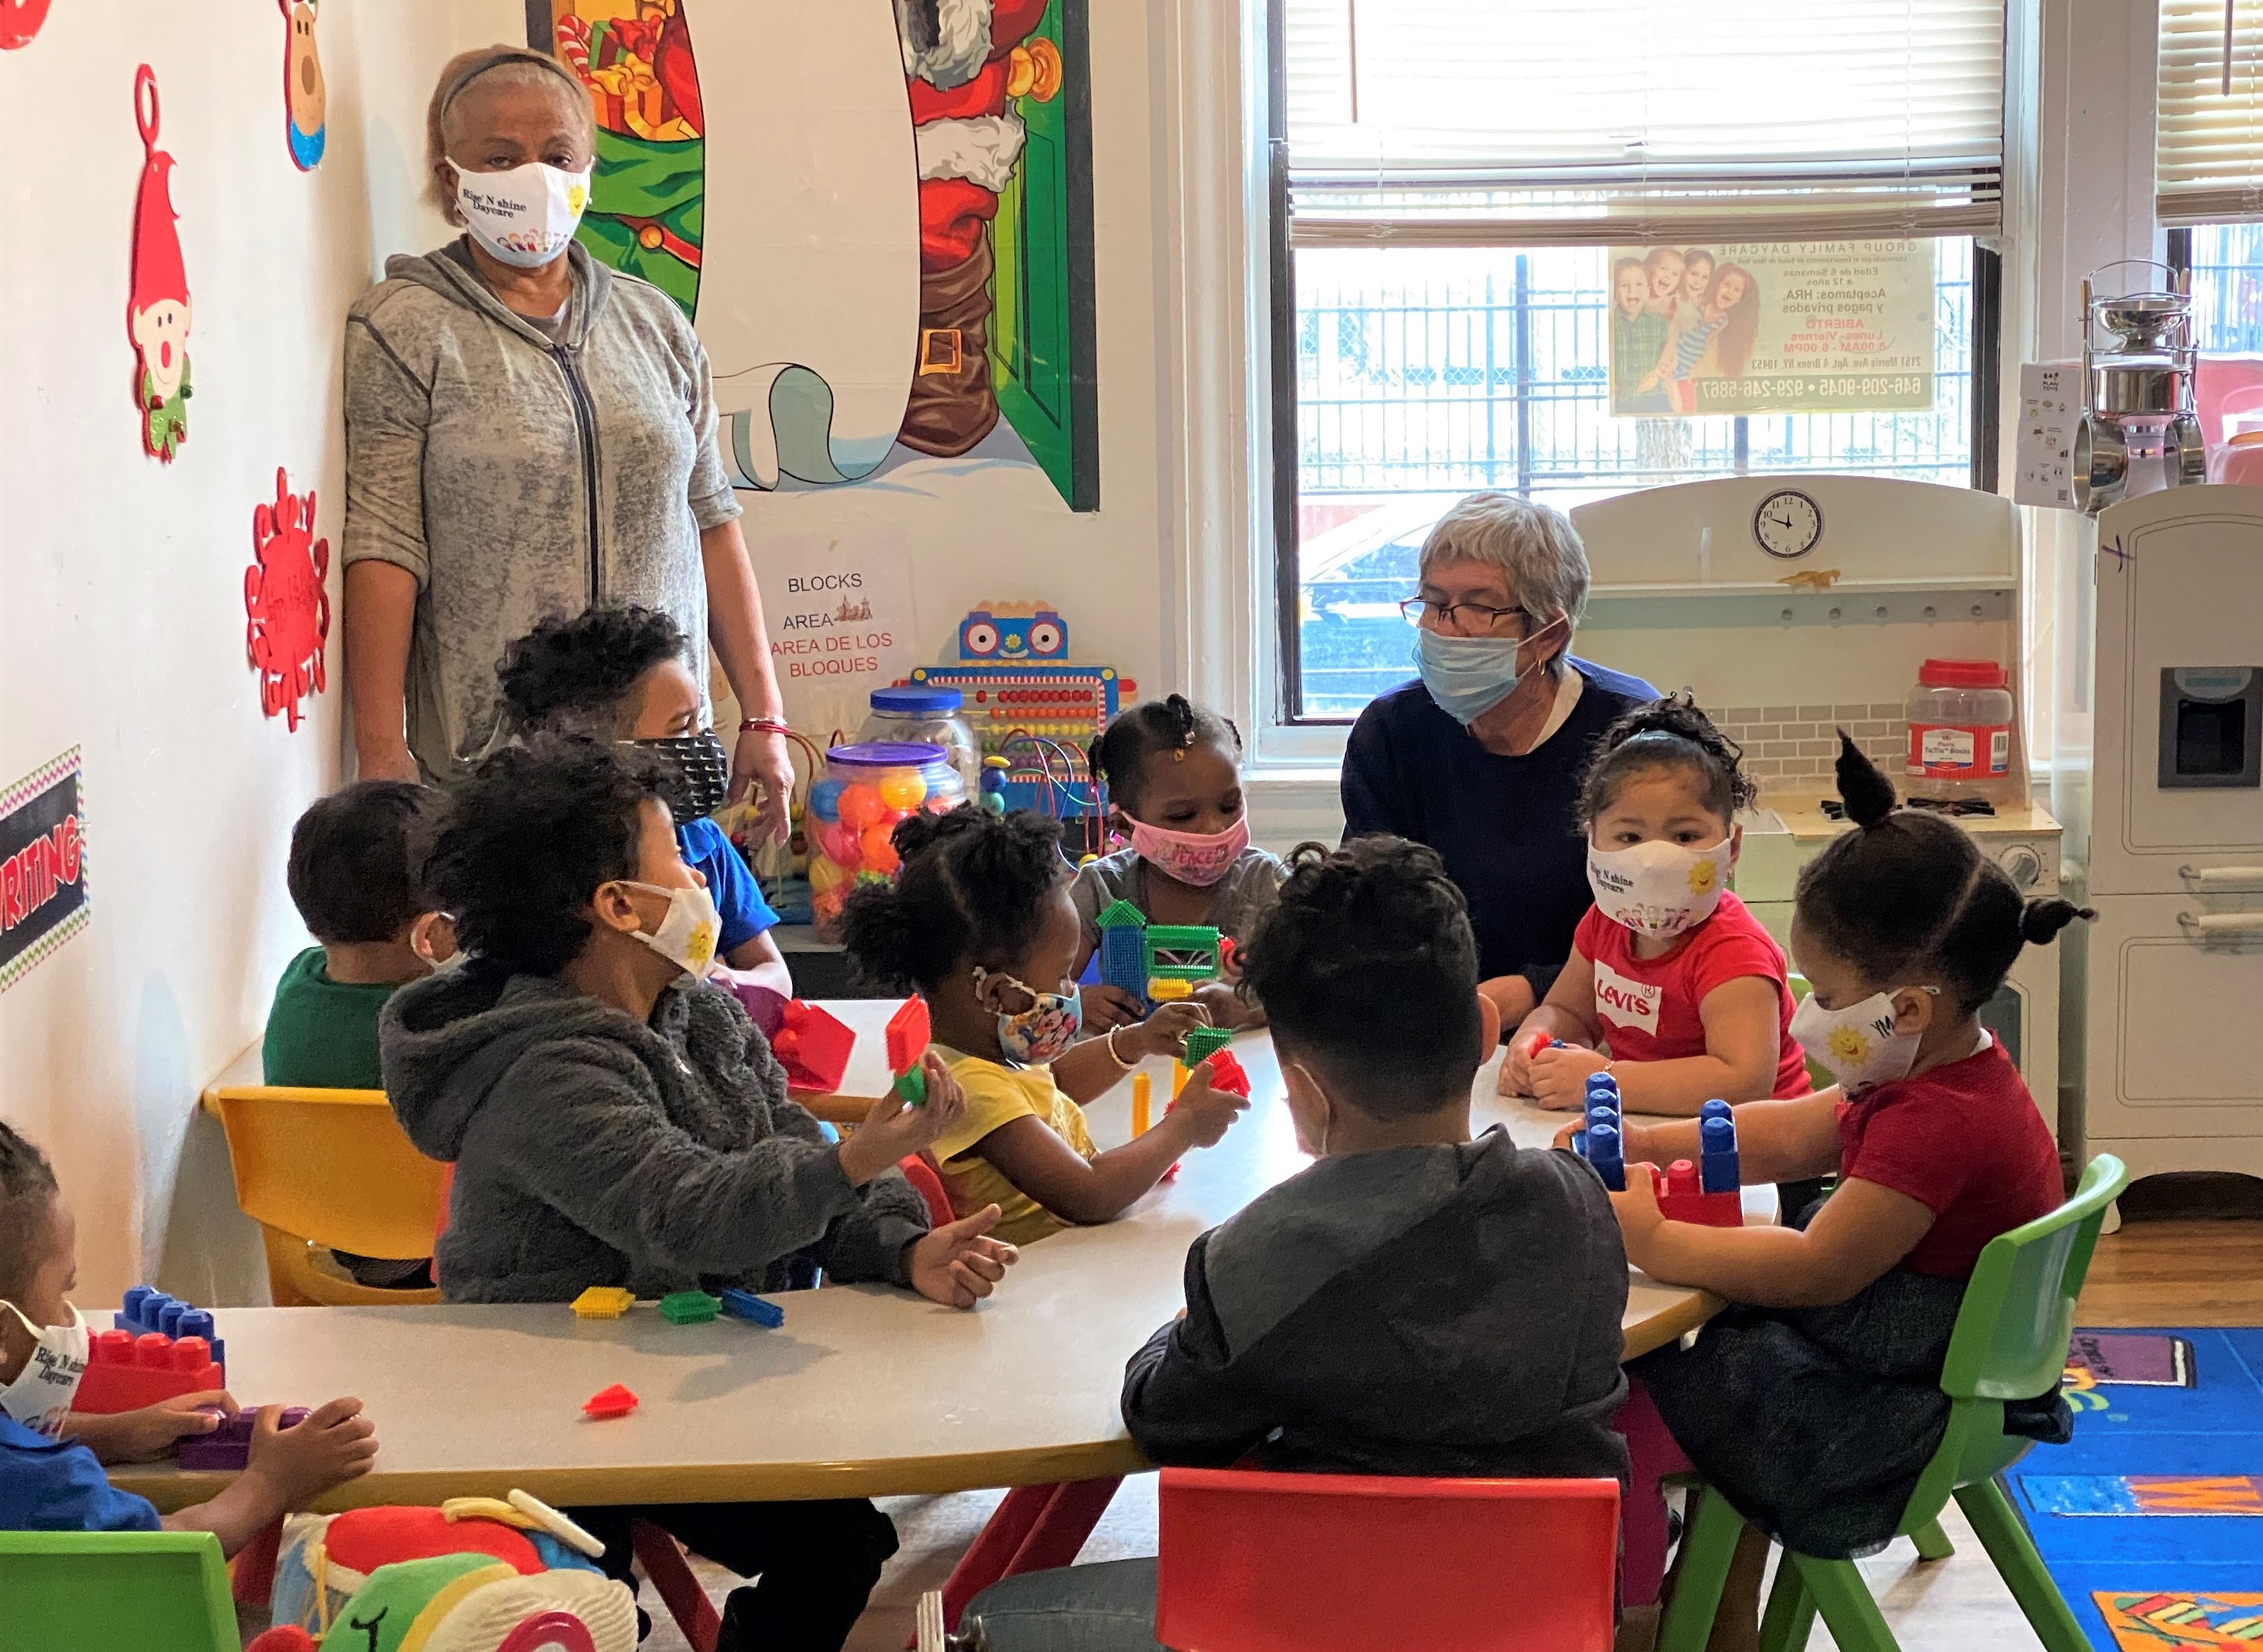 young students in a classroom for Group story time with masks on